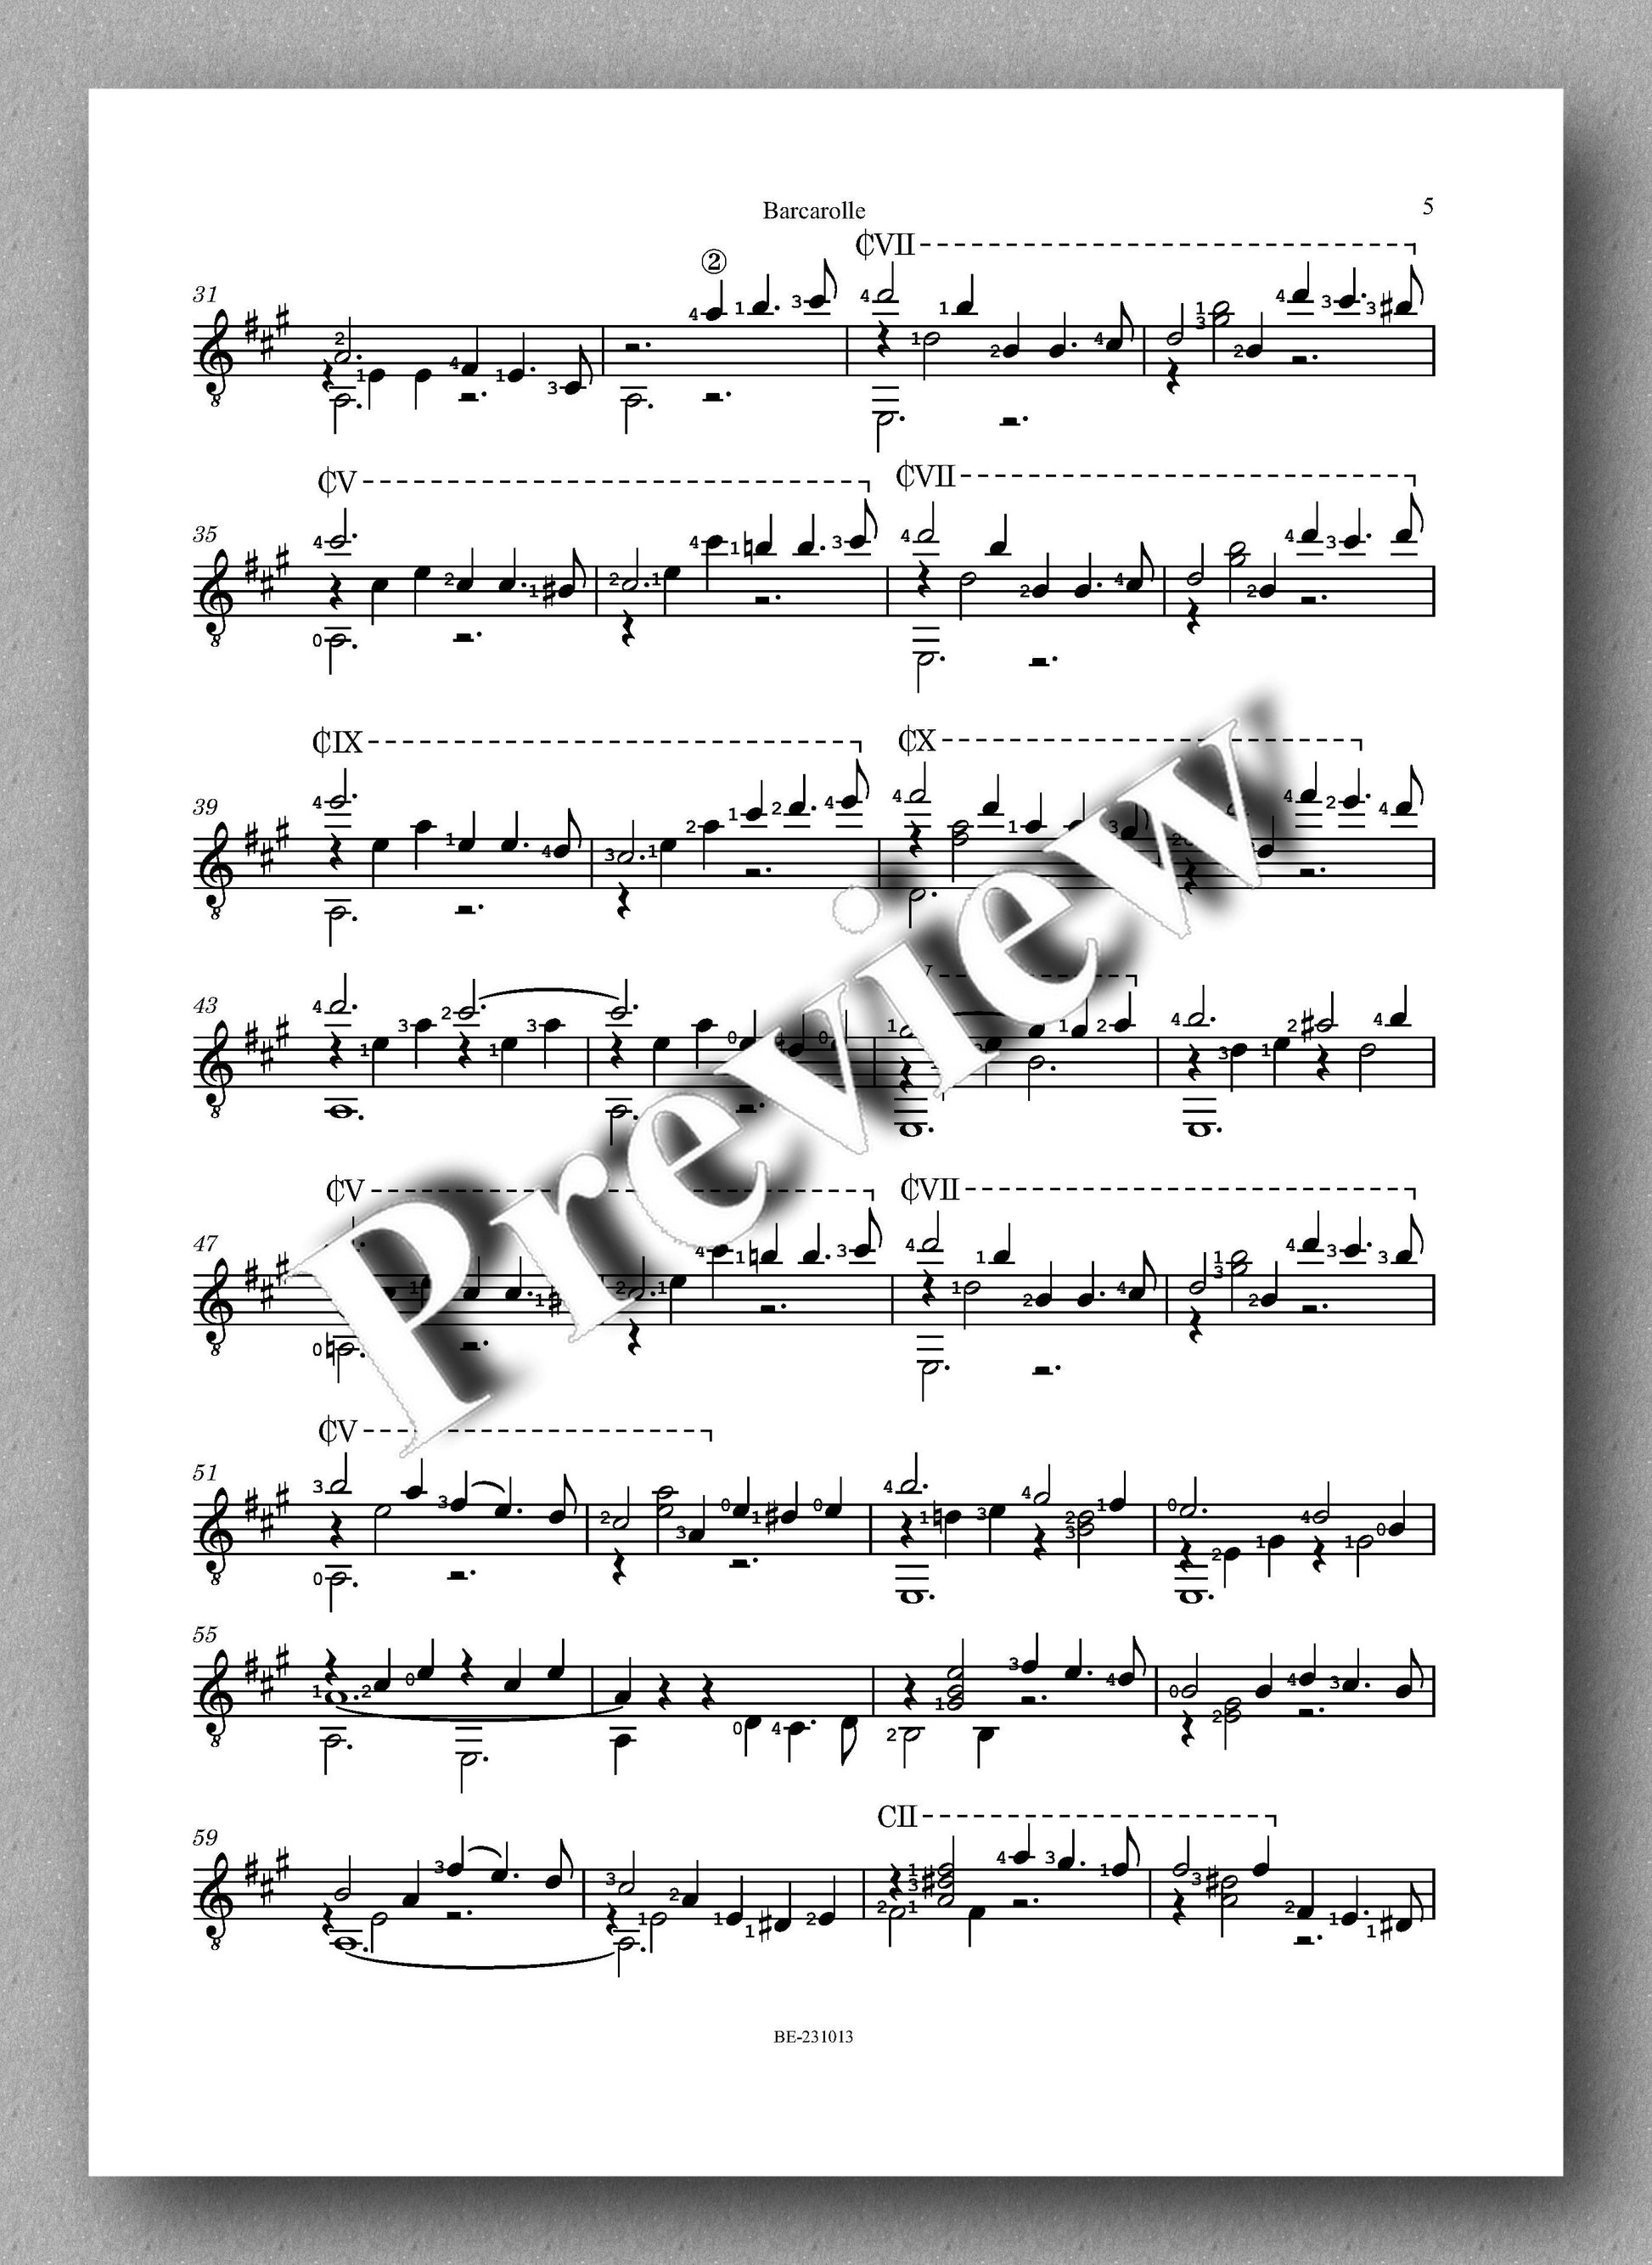 Gennadiy Pilch, Barcarolle - preview of the music score 2